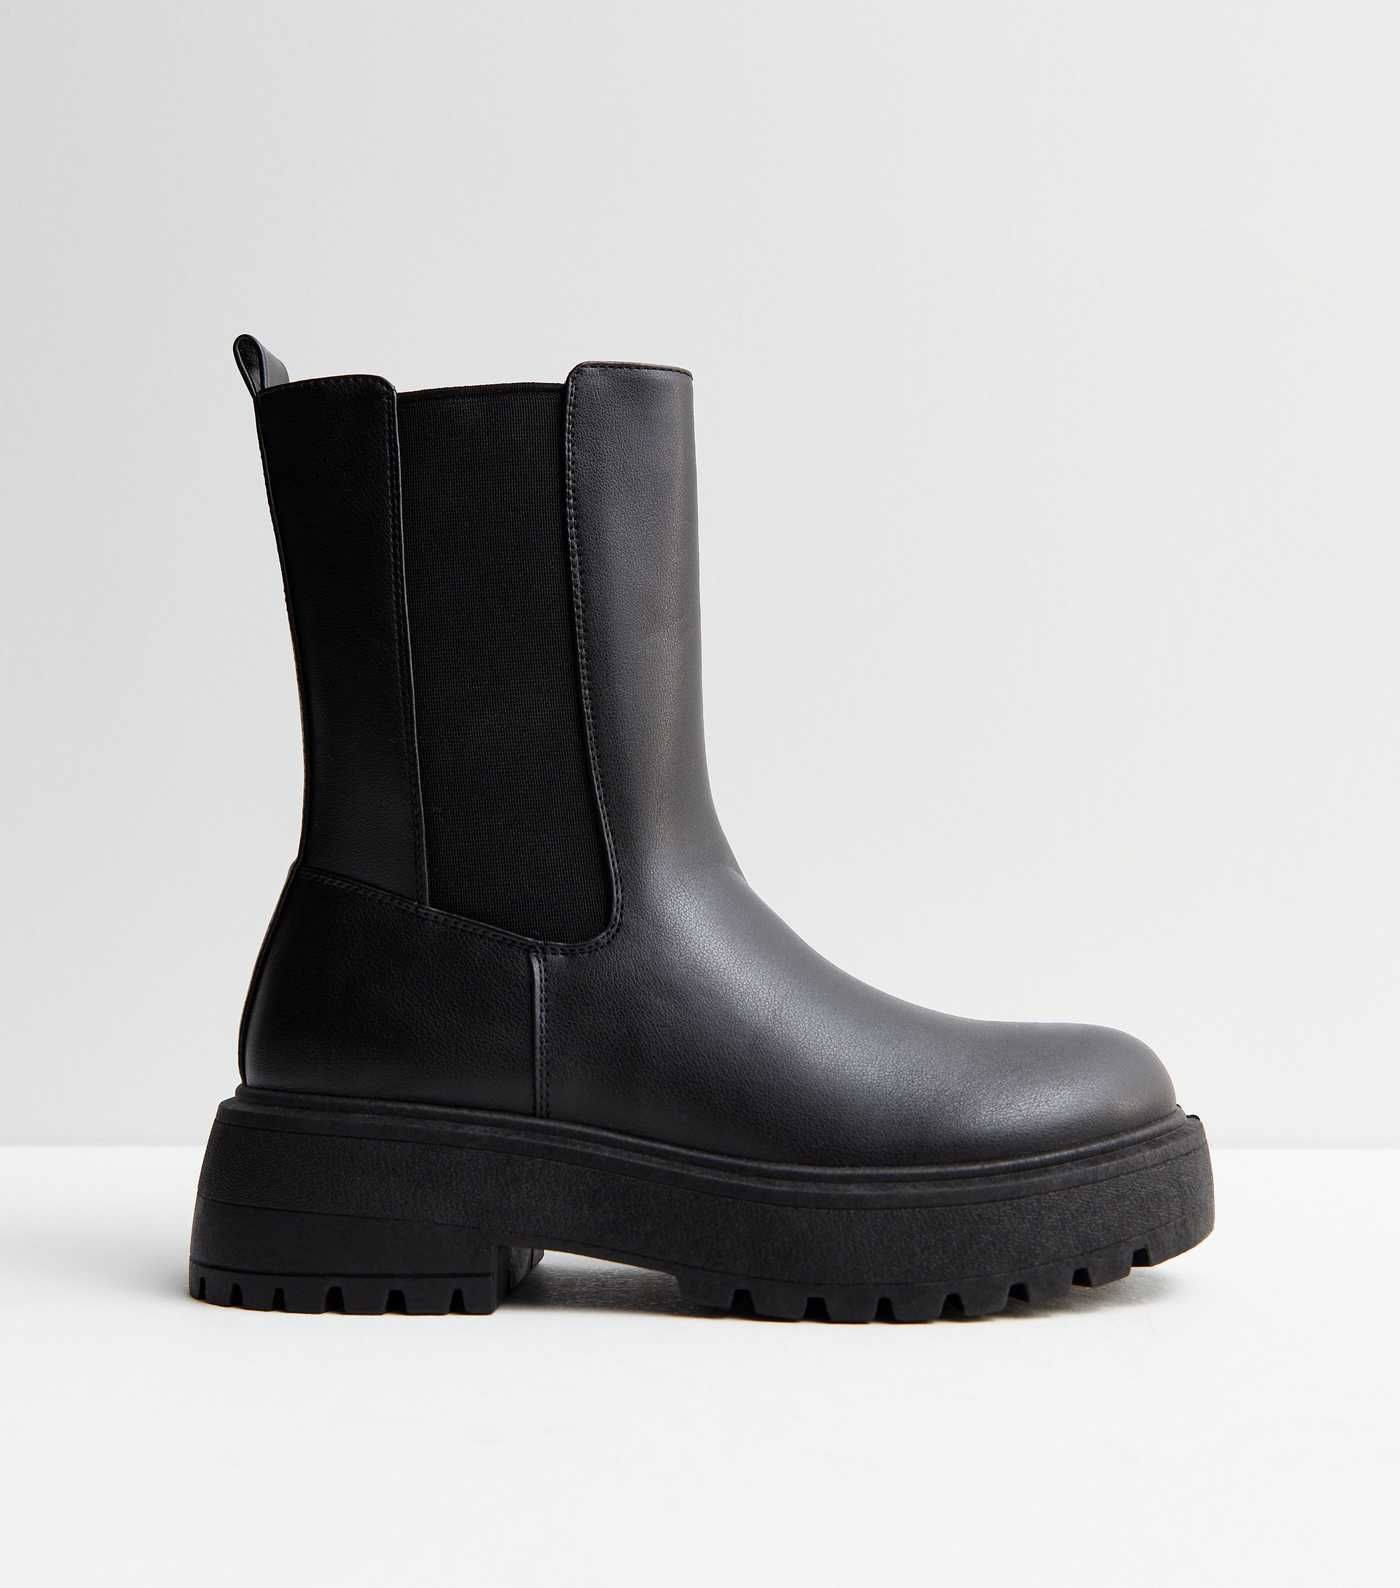 Black Leather-Look High Ankle Chelsea Boots
						
						Add to Saved Items
						Remove from Sav... | New Look (UK)